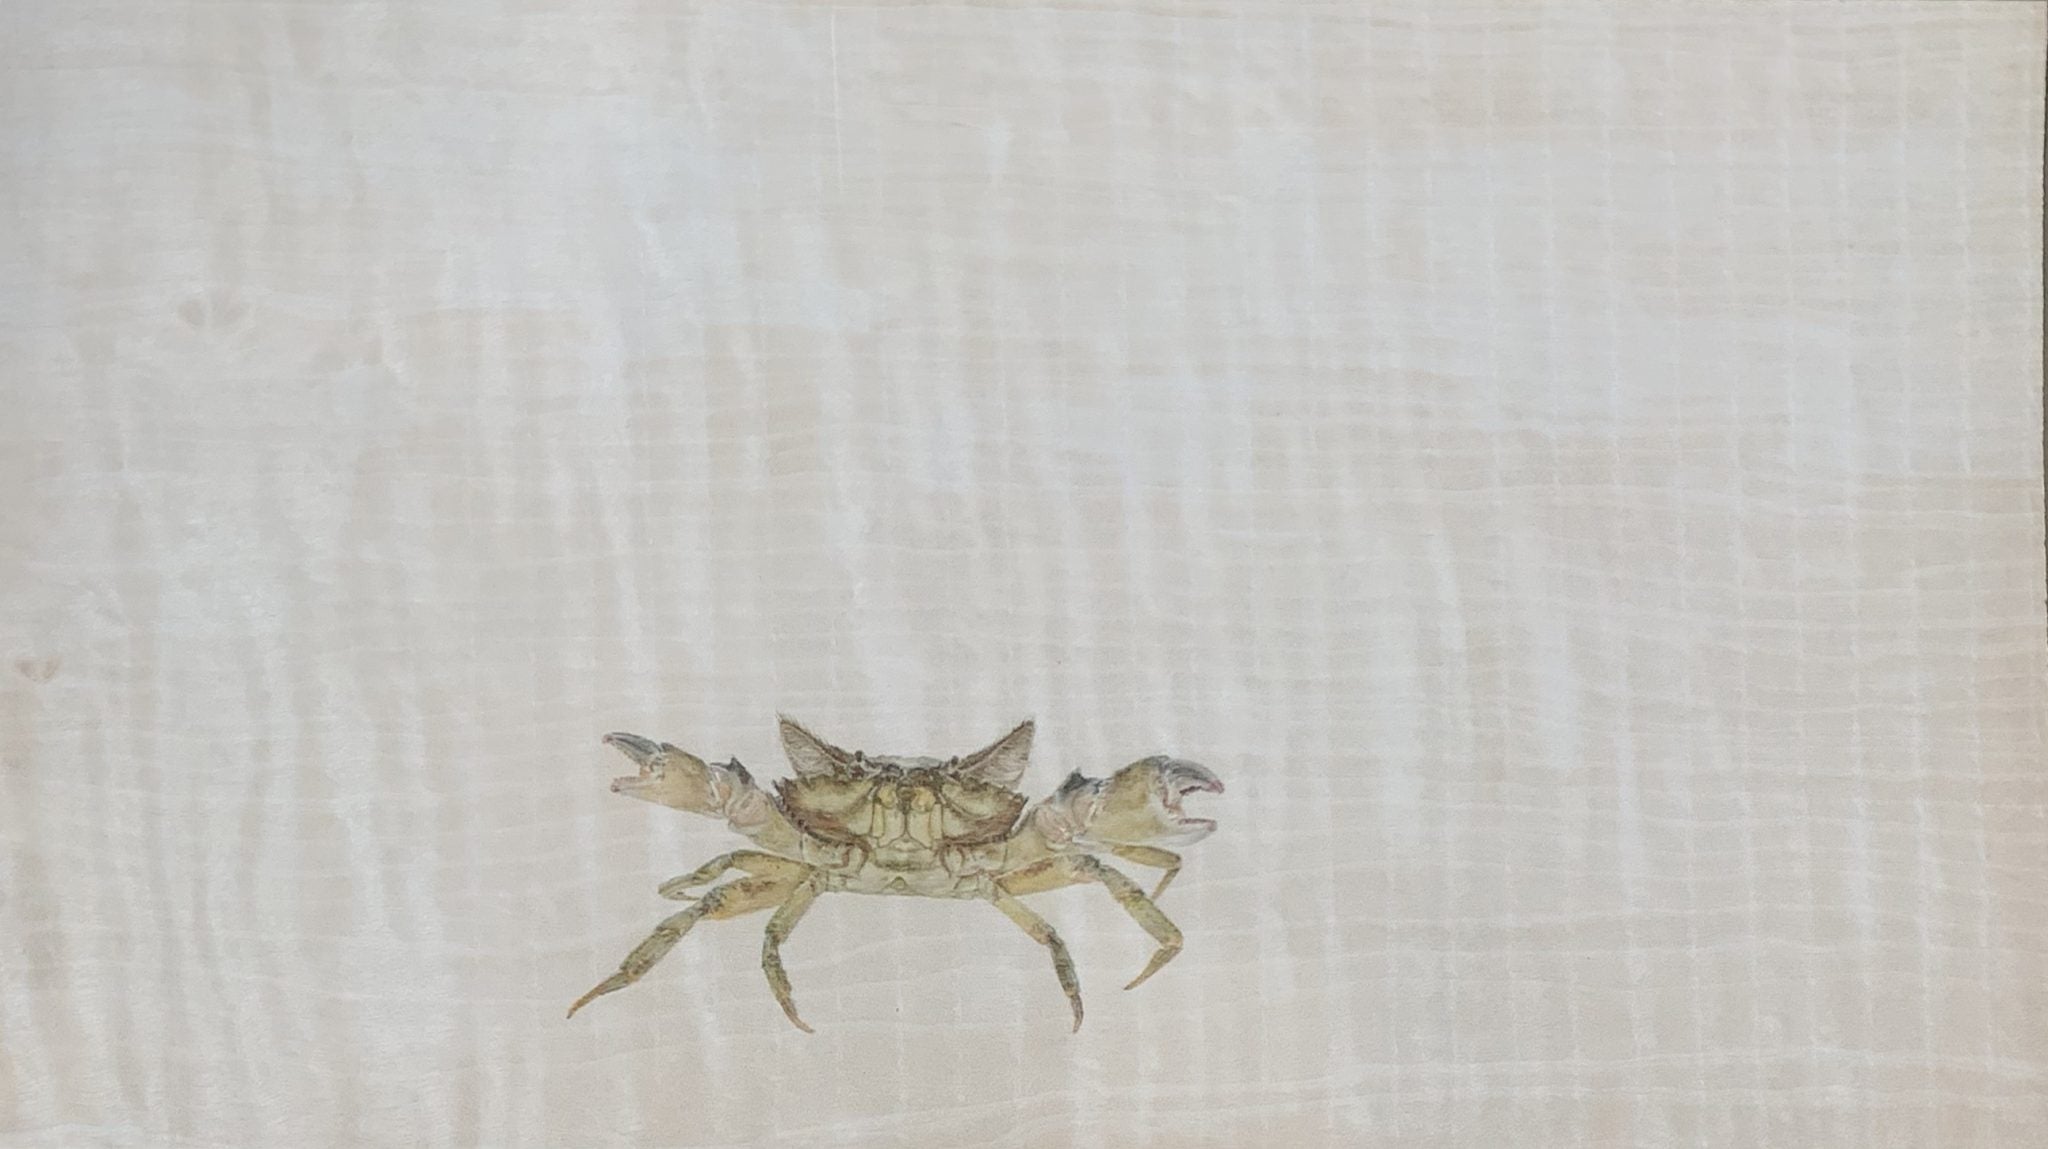 Lindsay Kohles • Tabby Crab with Claws Extended